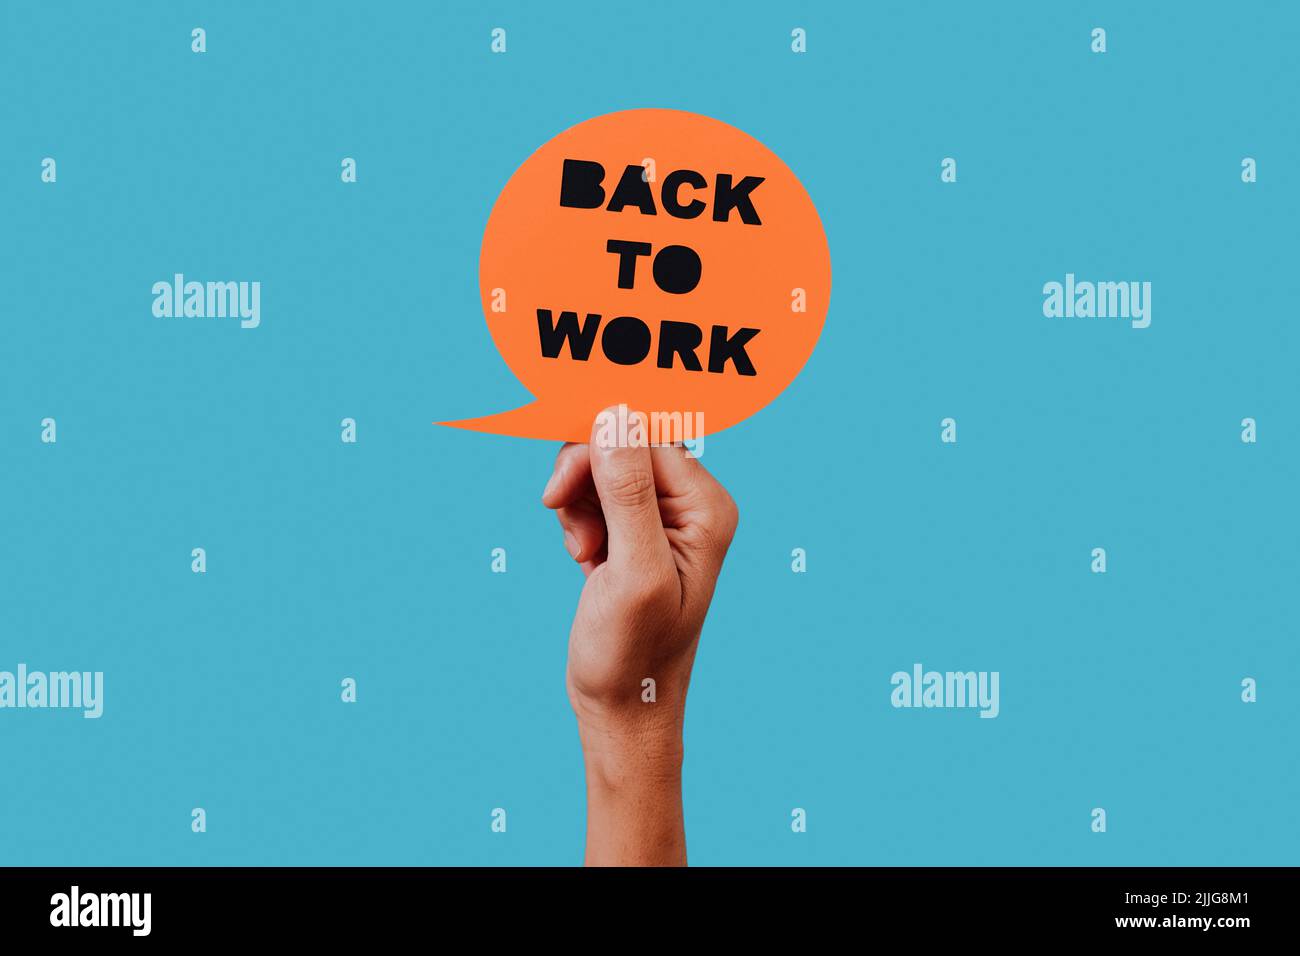 man holds an orange paper sign, in the shape of a speech bubble, with the text back to work in it, on a blue background Stock Photo